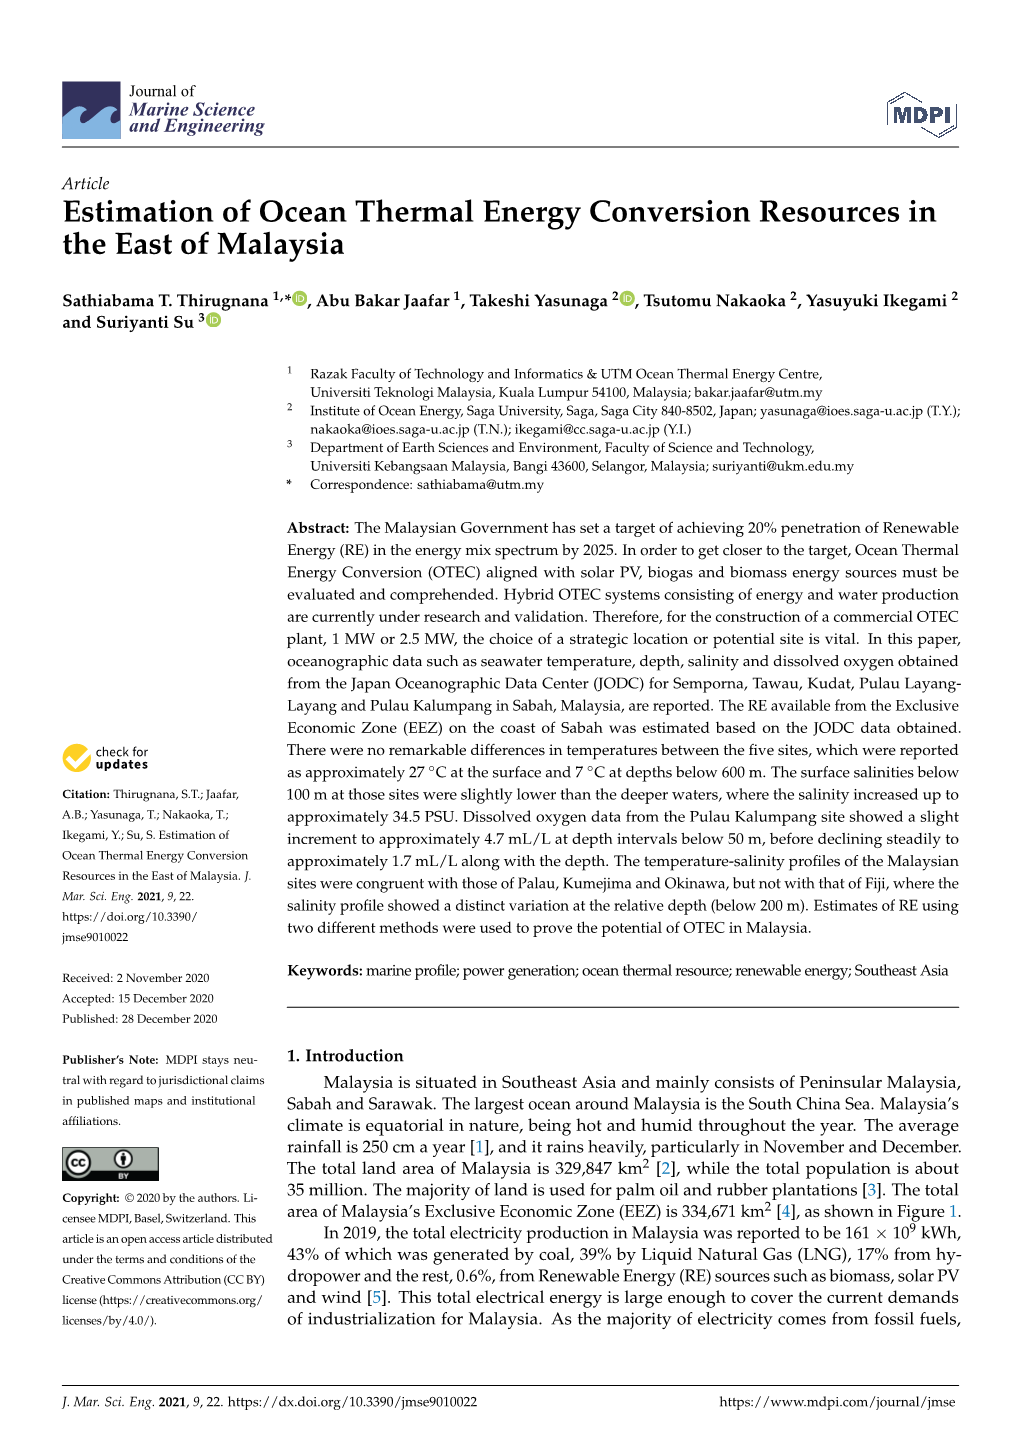 Estimation of Ocean Thermal Energy Conversion Resources in the East of Malaysia